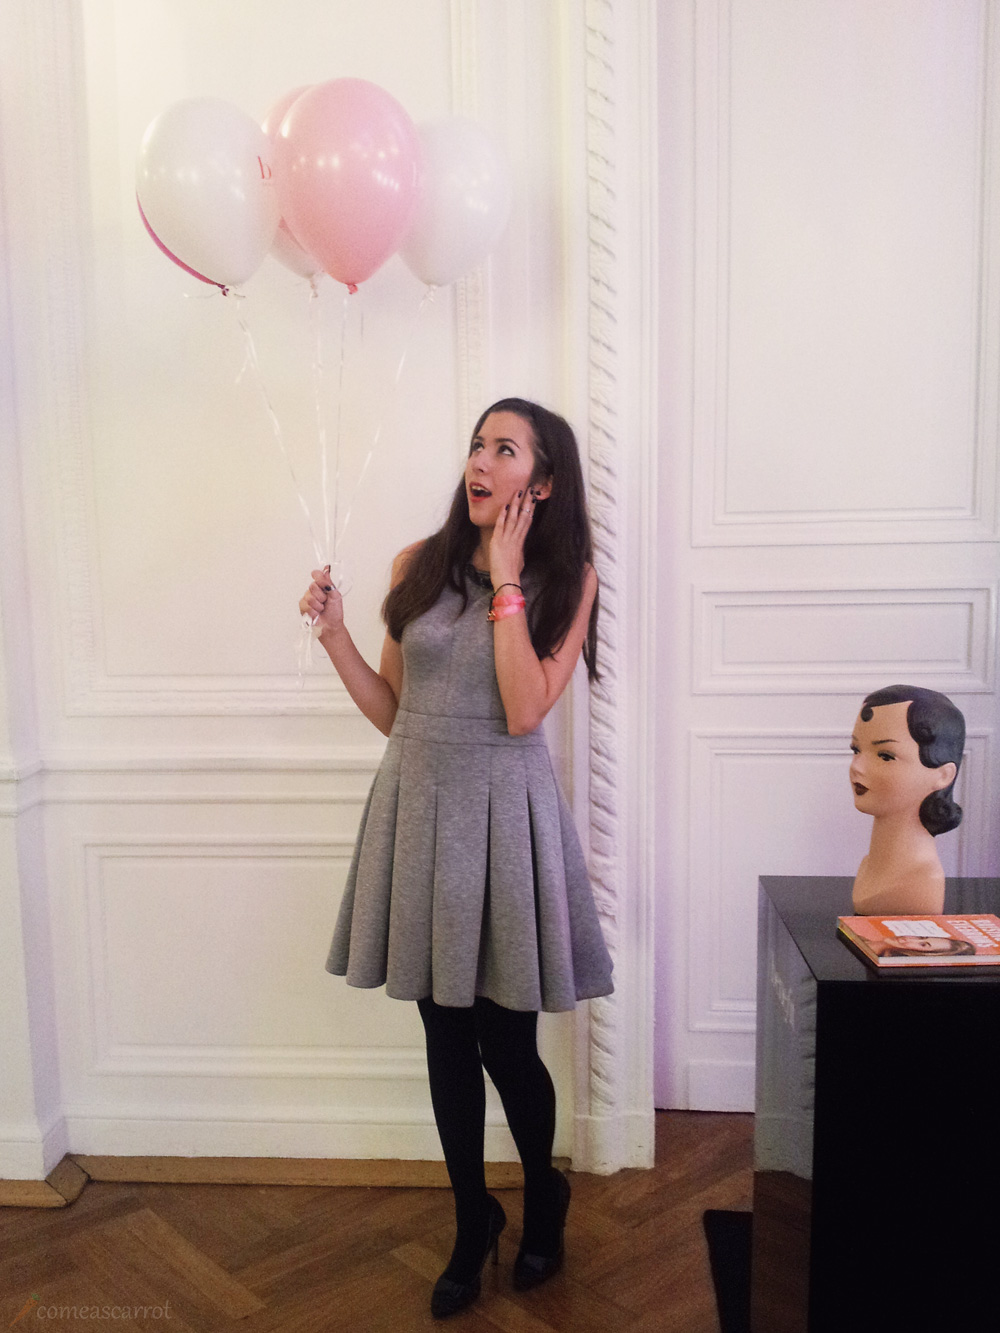 shoe step of the year 2014, award, event, blogger, benefit, ballons, clarks shoes, comptoir des cotonniers, outfit, dress, grey